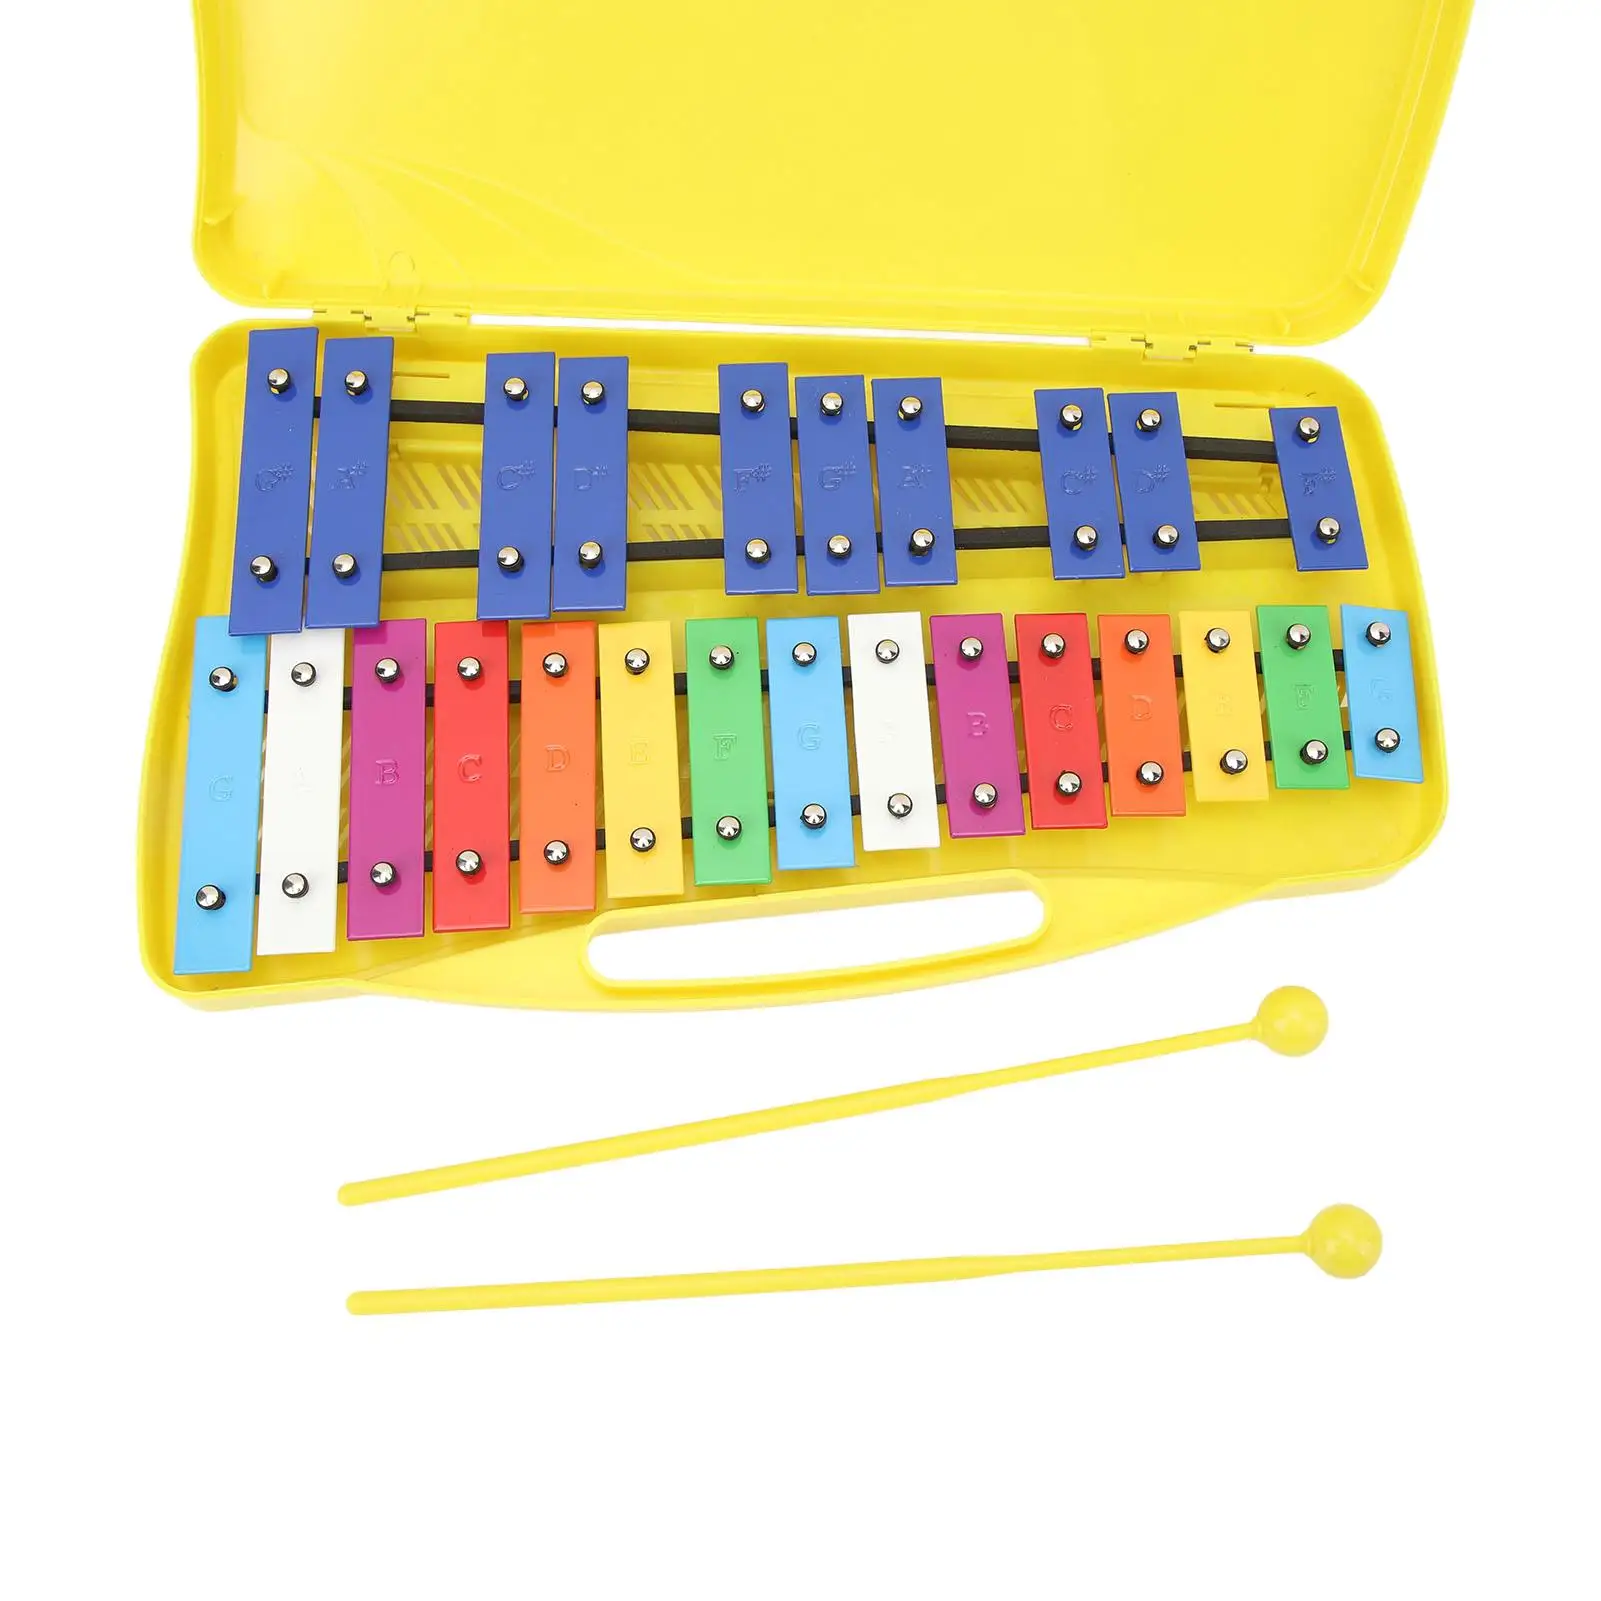 25 Note Professional Xylophone with Metal Keys and Yellow Box for Toddlers